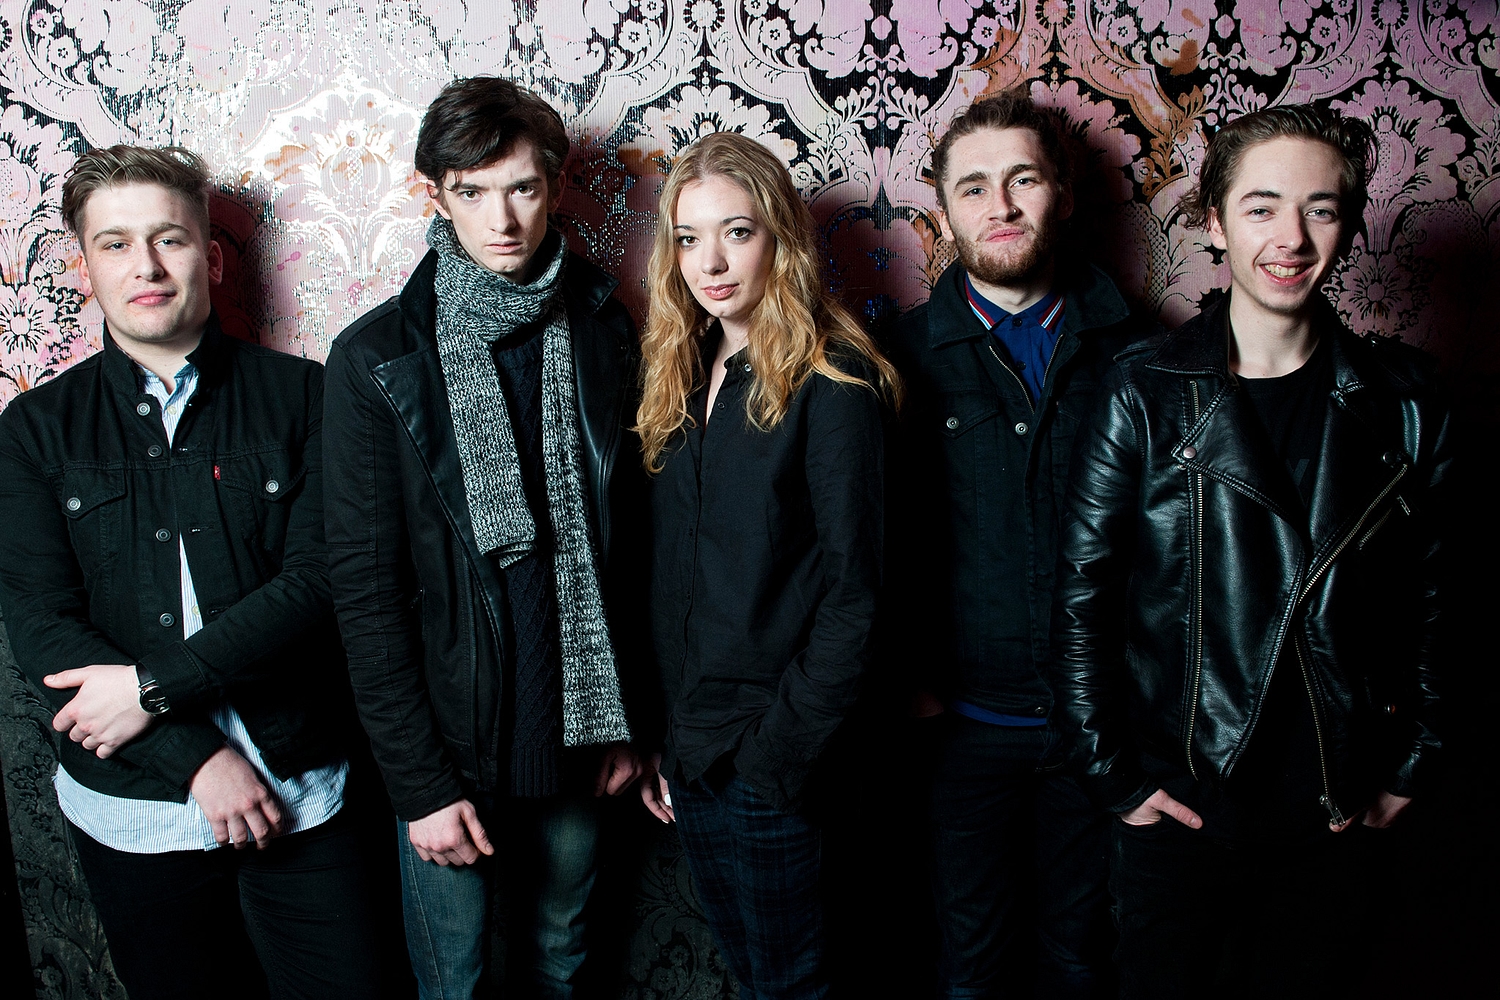 Marmozets: “Since the album’s come out, there’s been a big step up”